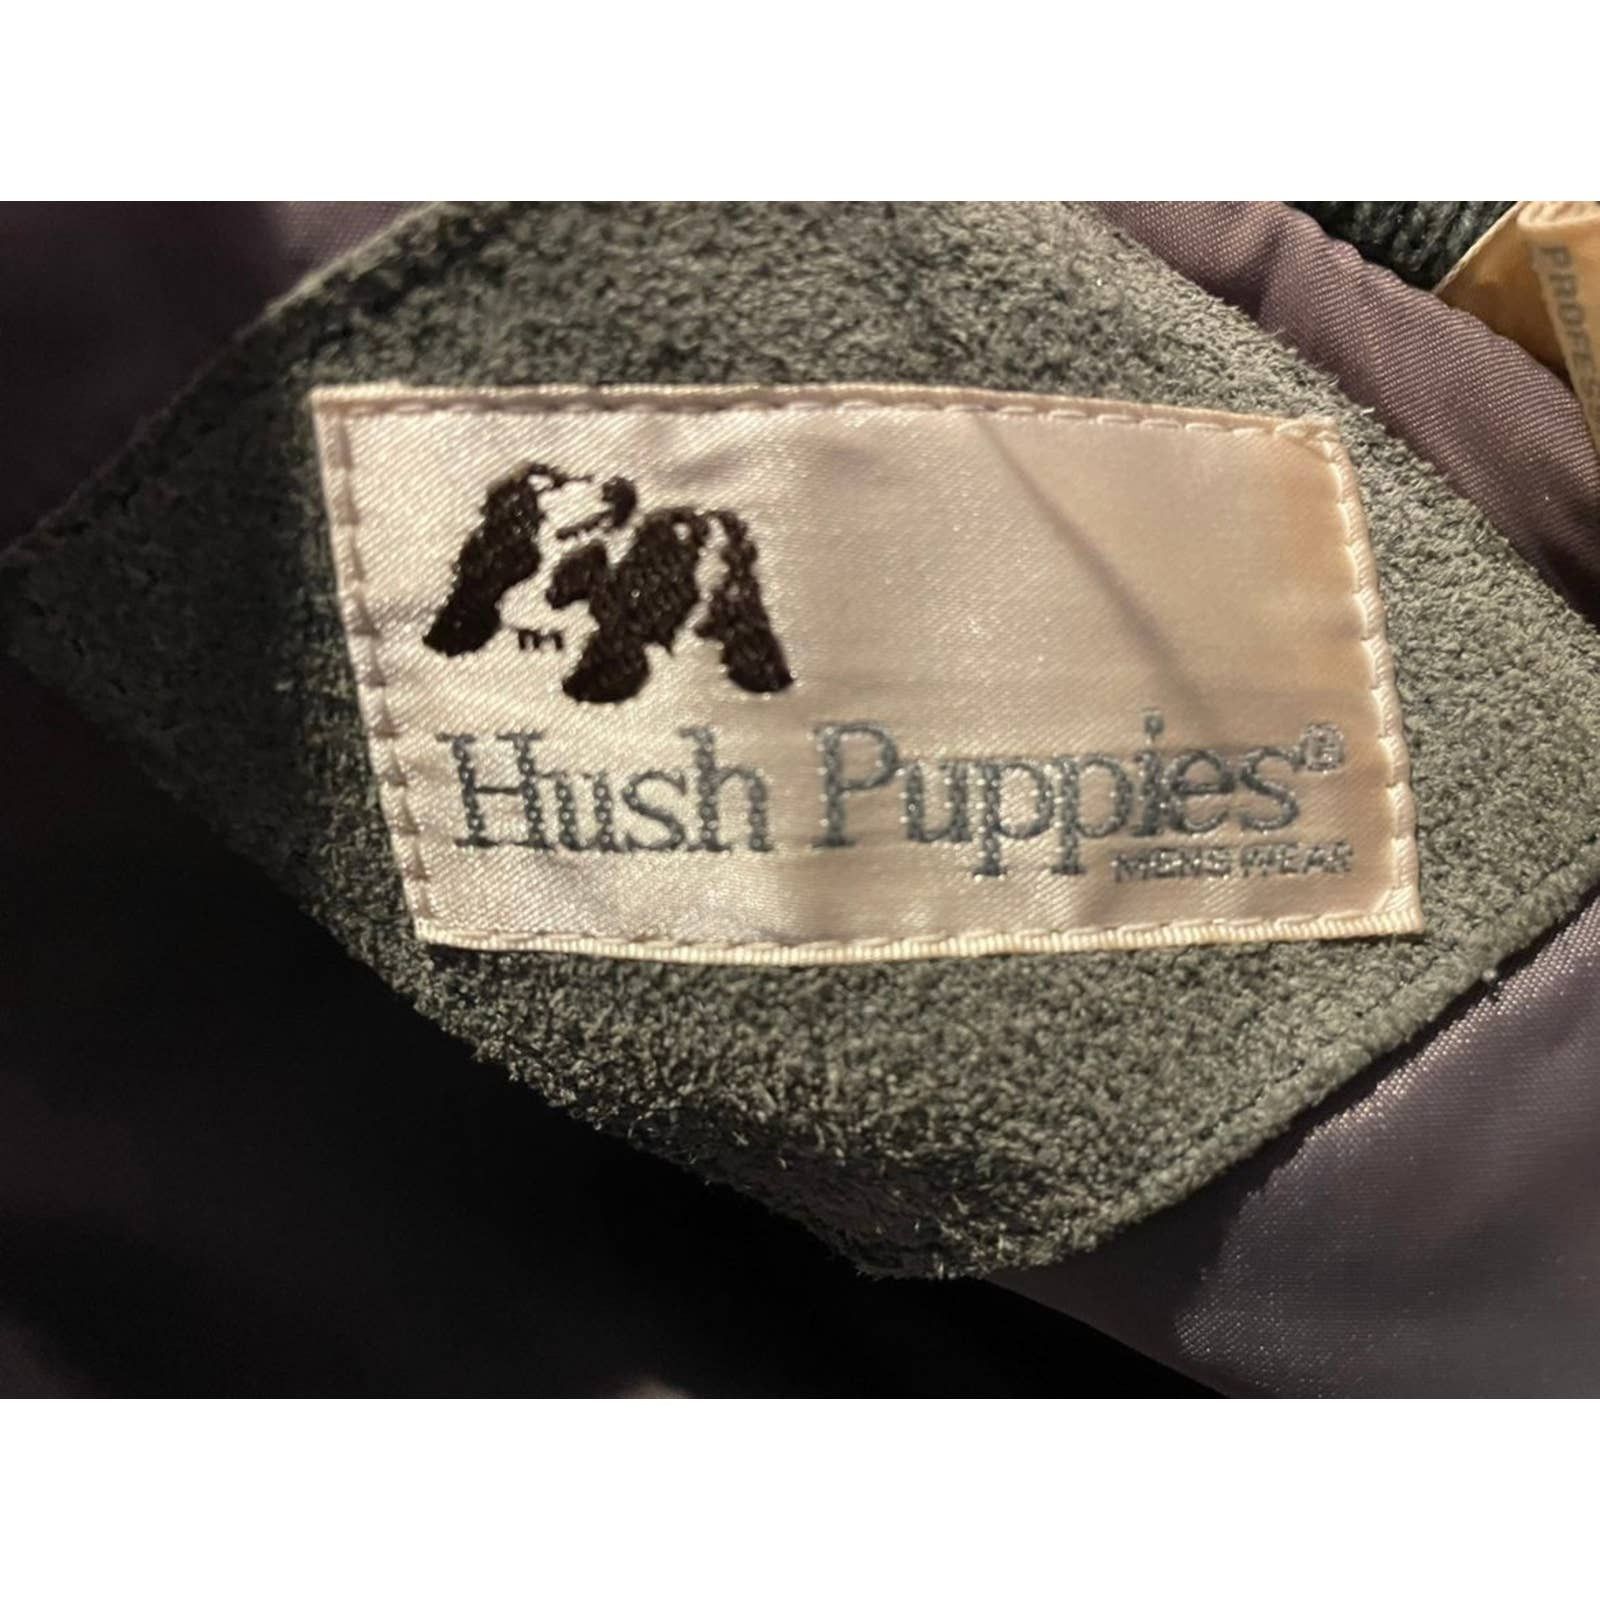 Hush Puppies VTG Men's Hush Puppies Leather Cardigan Size US M / EU 48-50 / 2 - 2 Preview